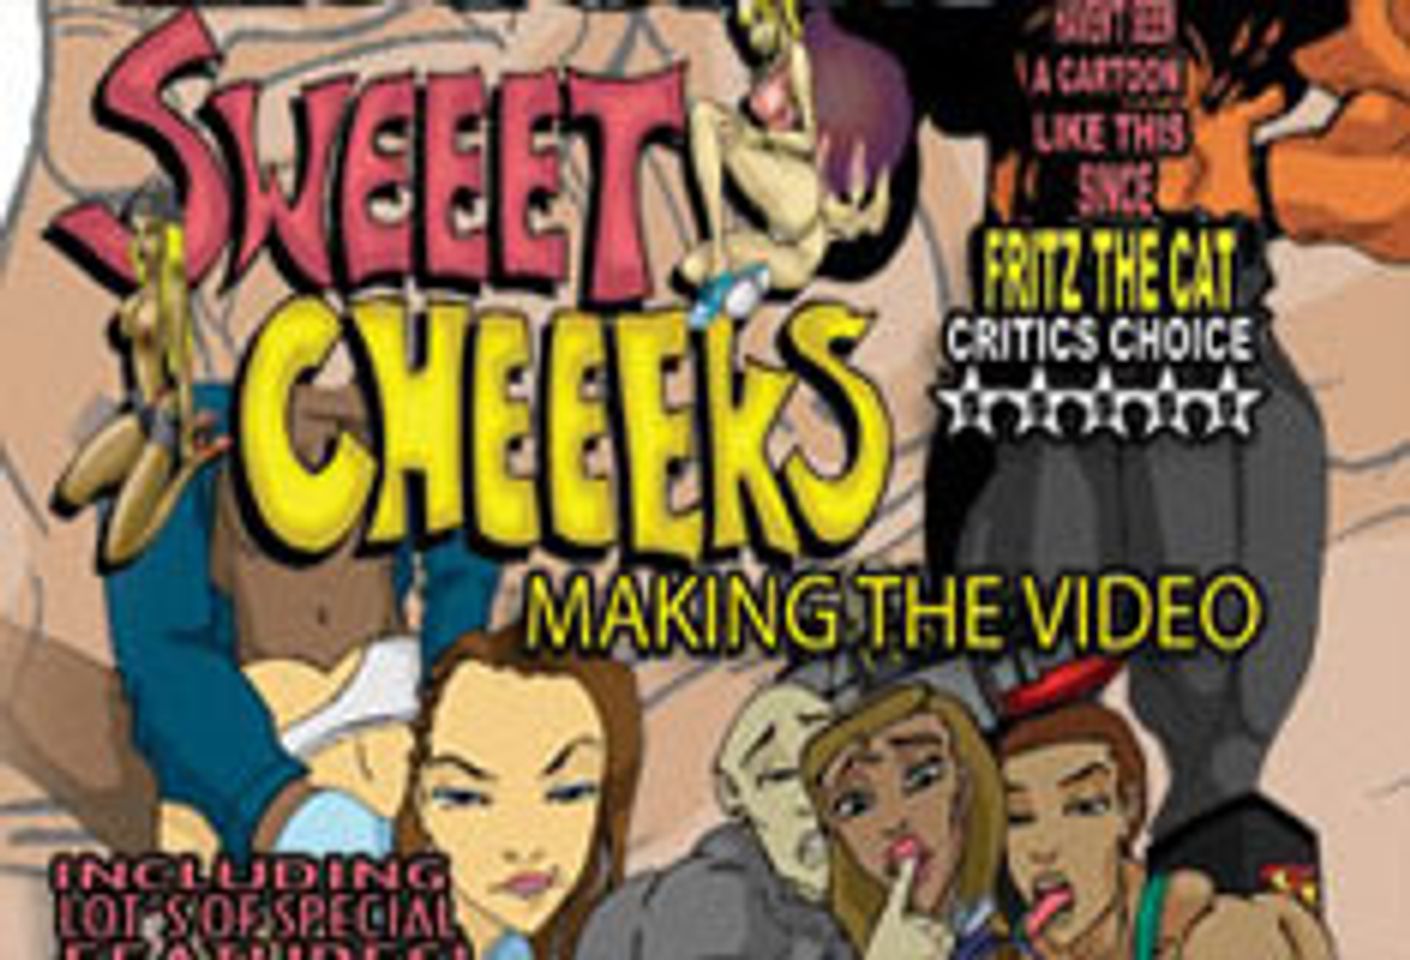 Antigua Pictures Tackles Animation with <i>Sweeet Cheeks</i>